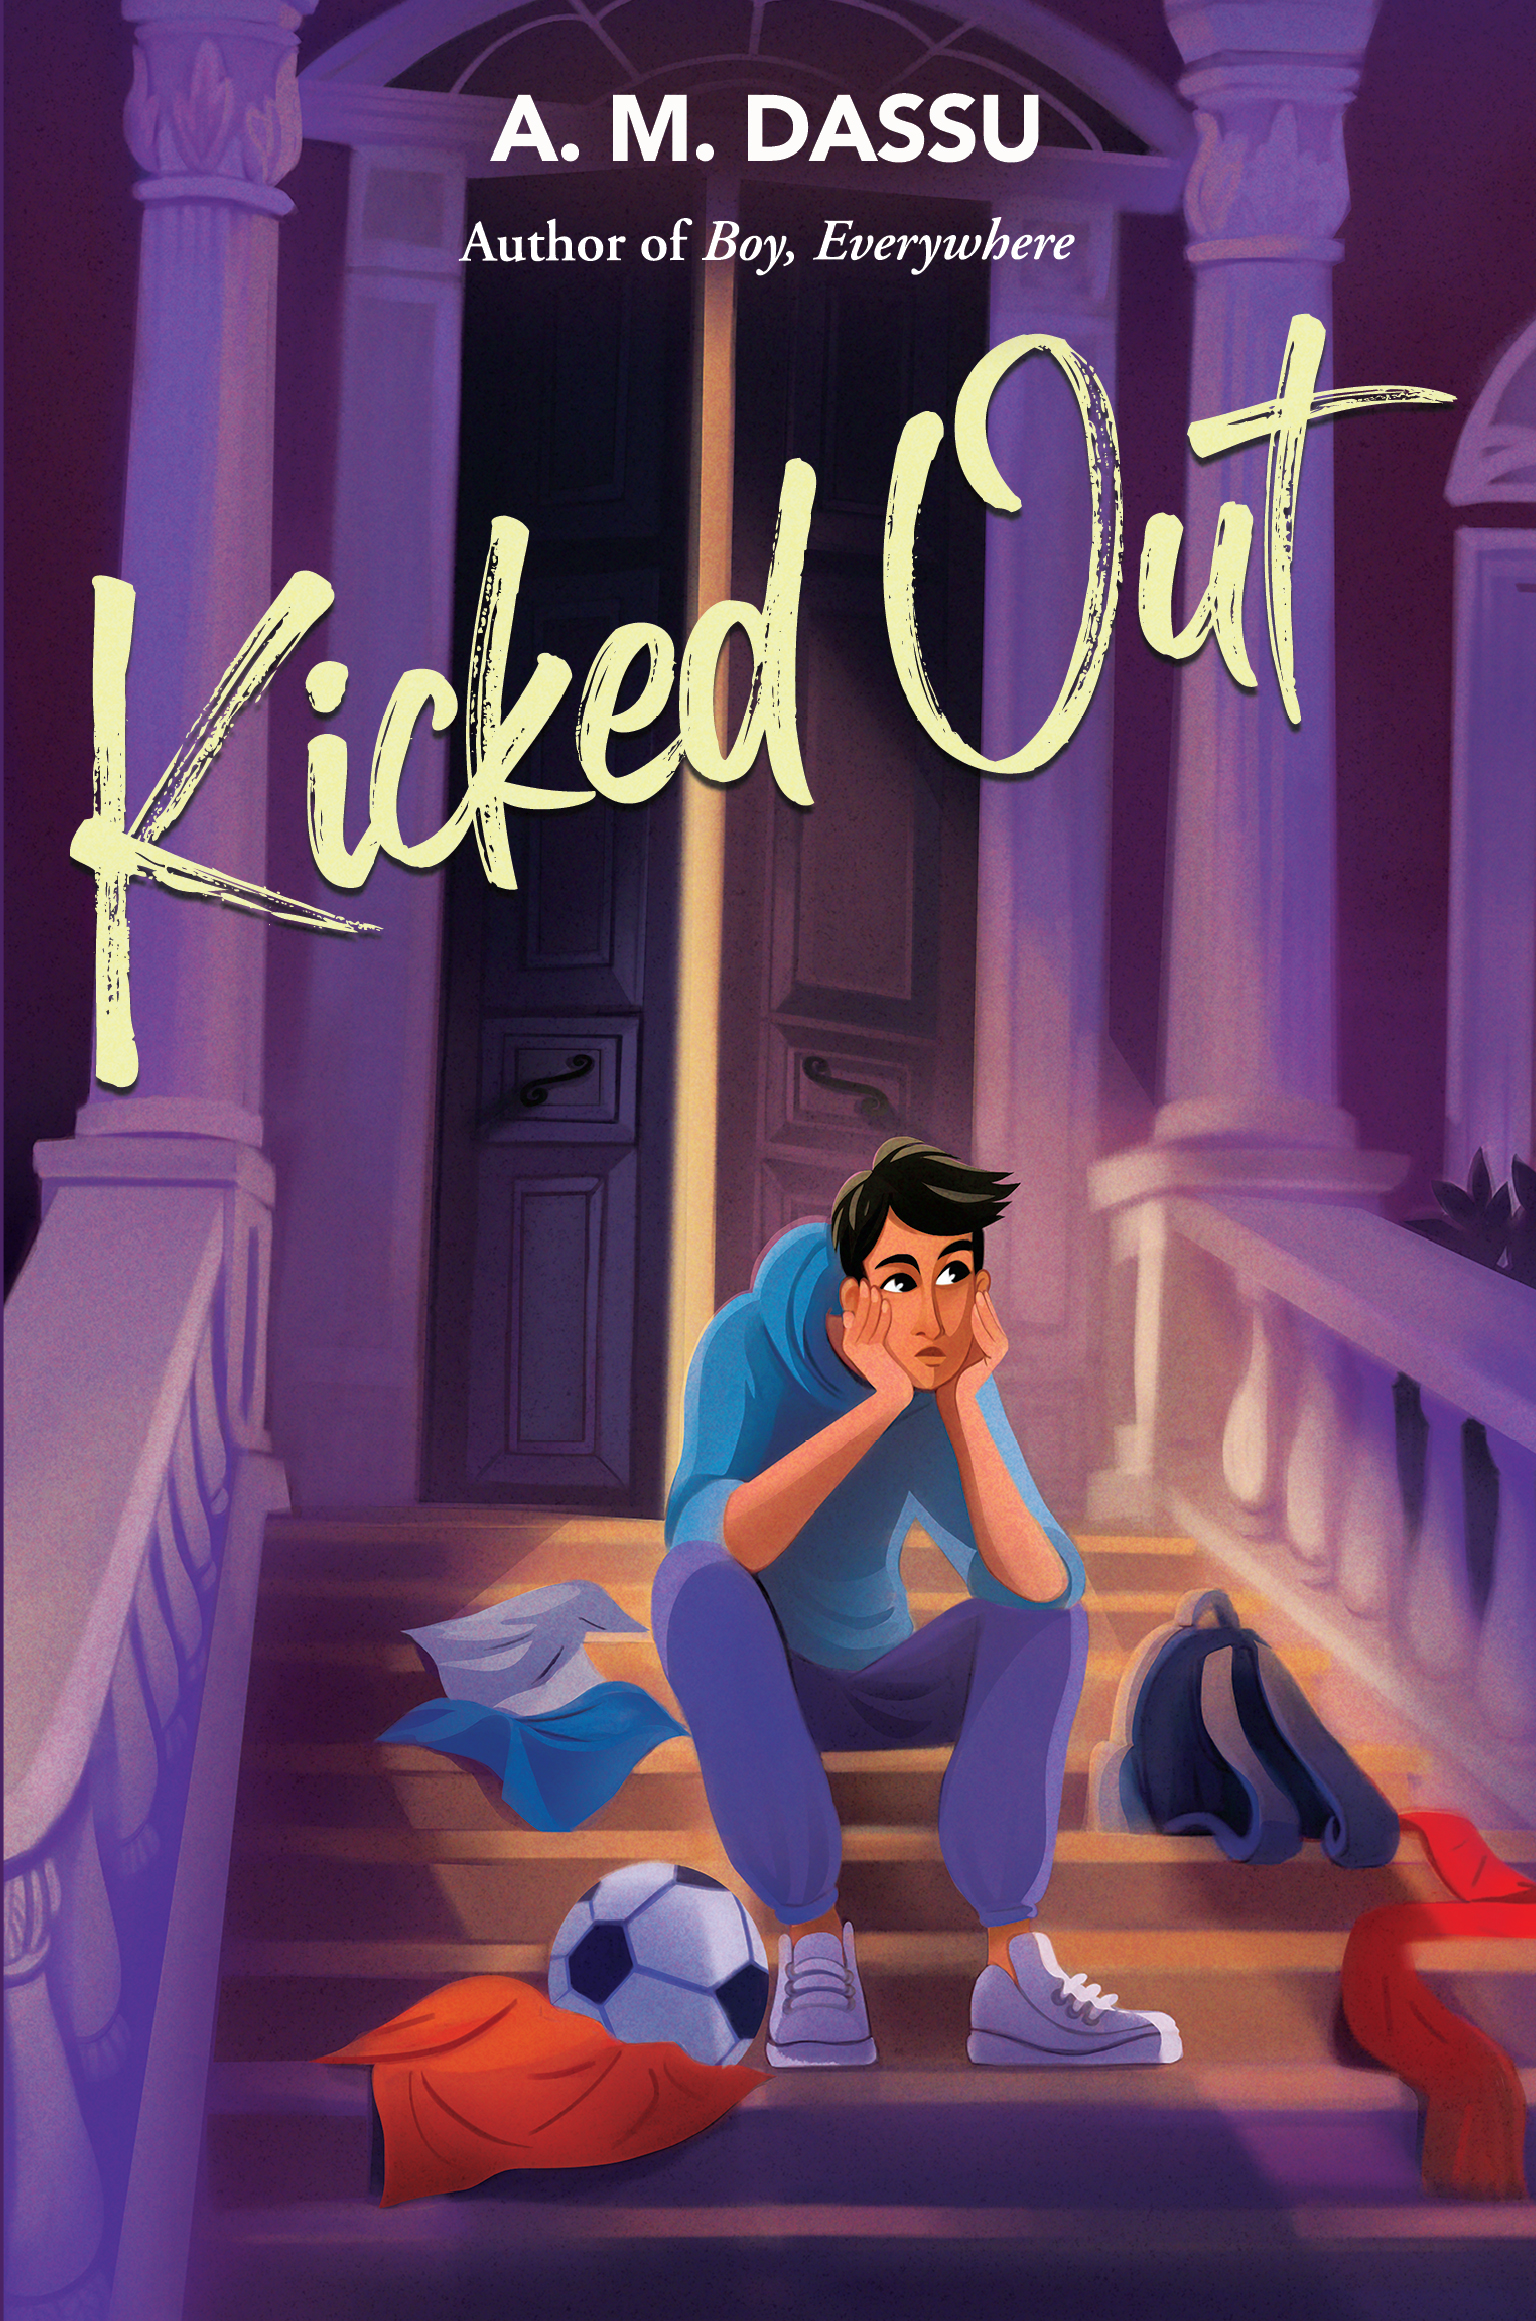 Image for "Kicked Out"